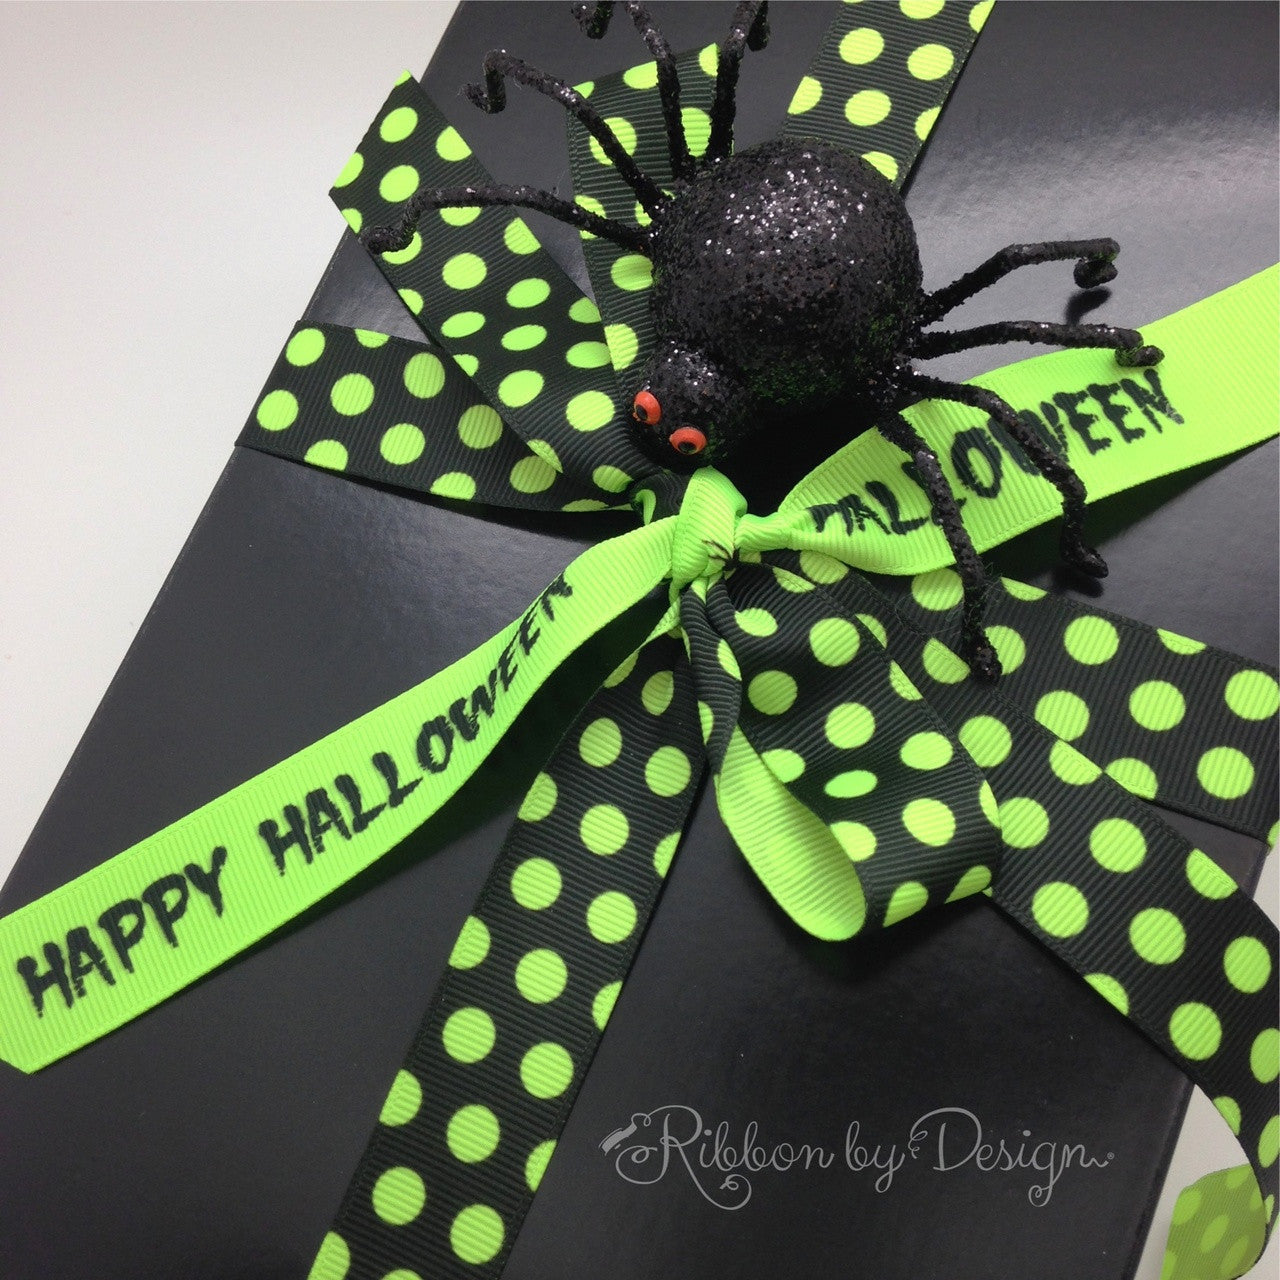 A Halloween gift box with a mix of neon green dots and Happy Halloween in neon green and black will make the recipient smile!